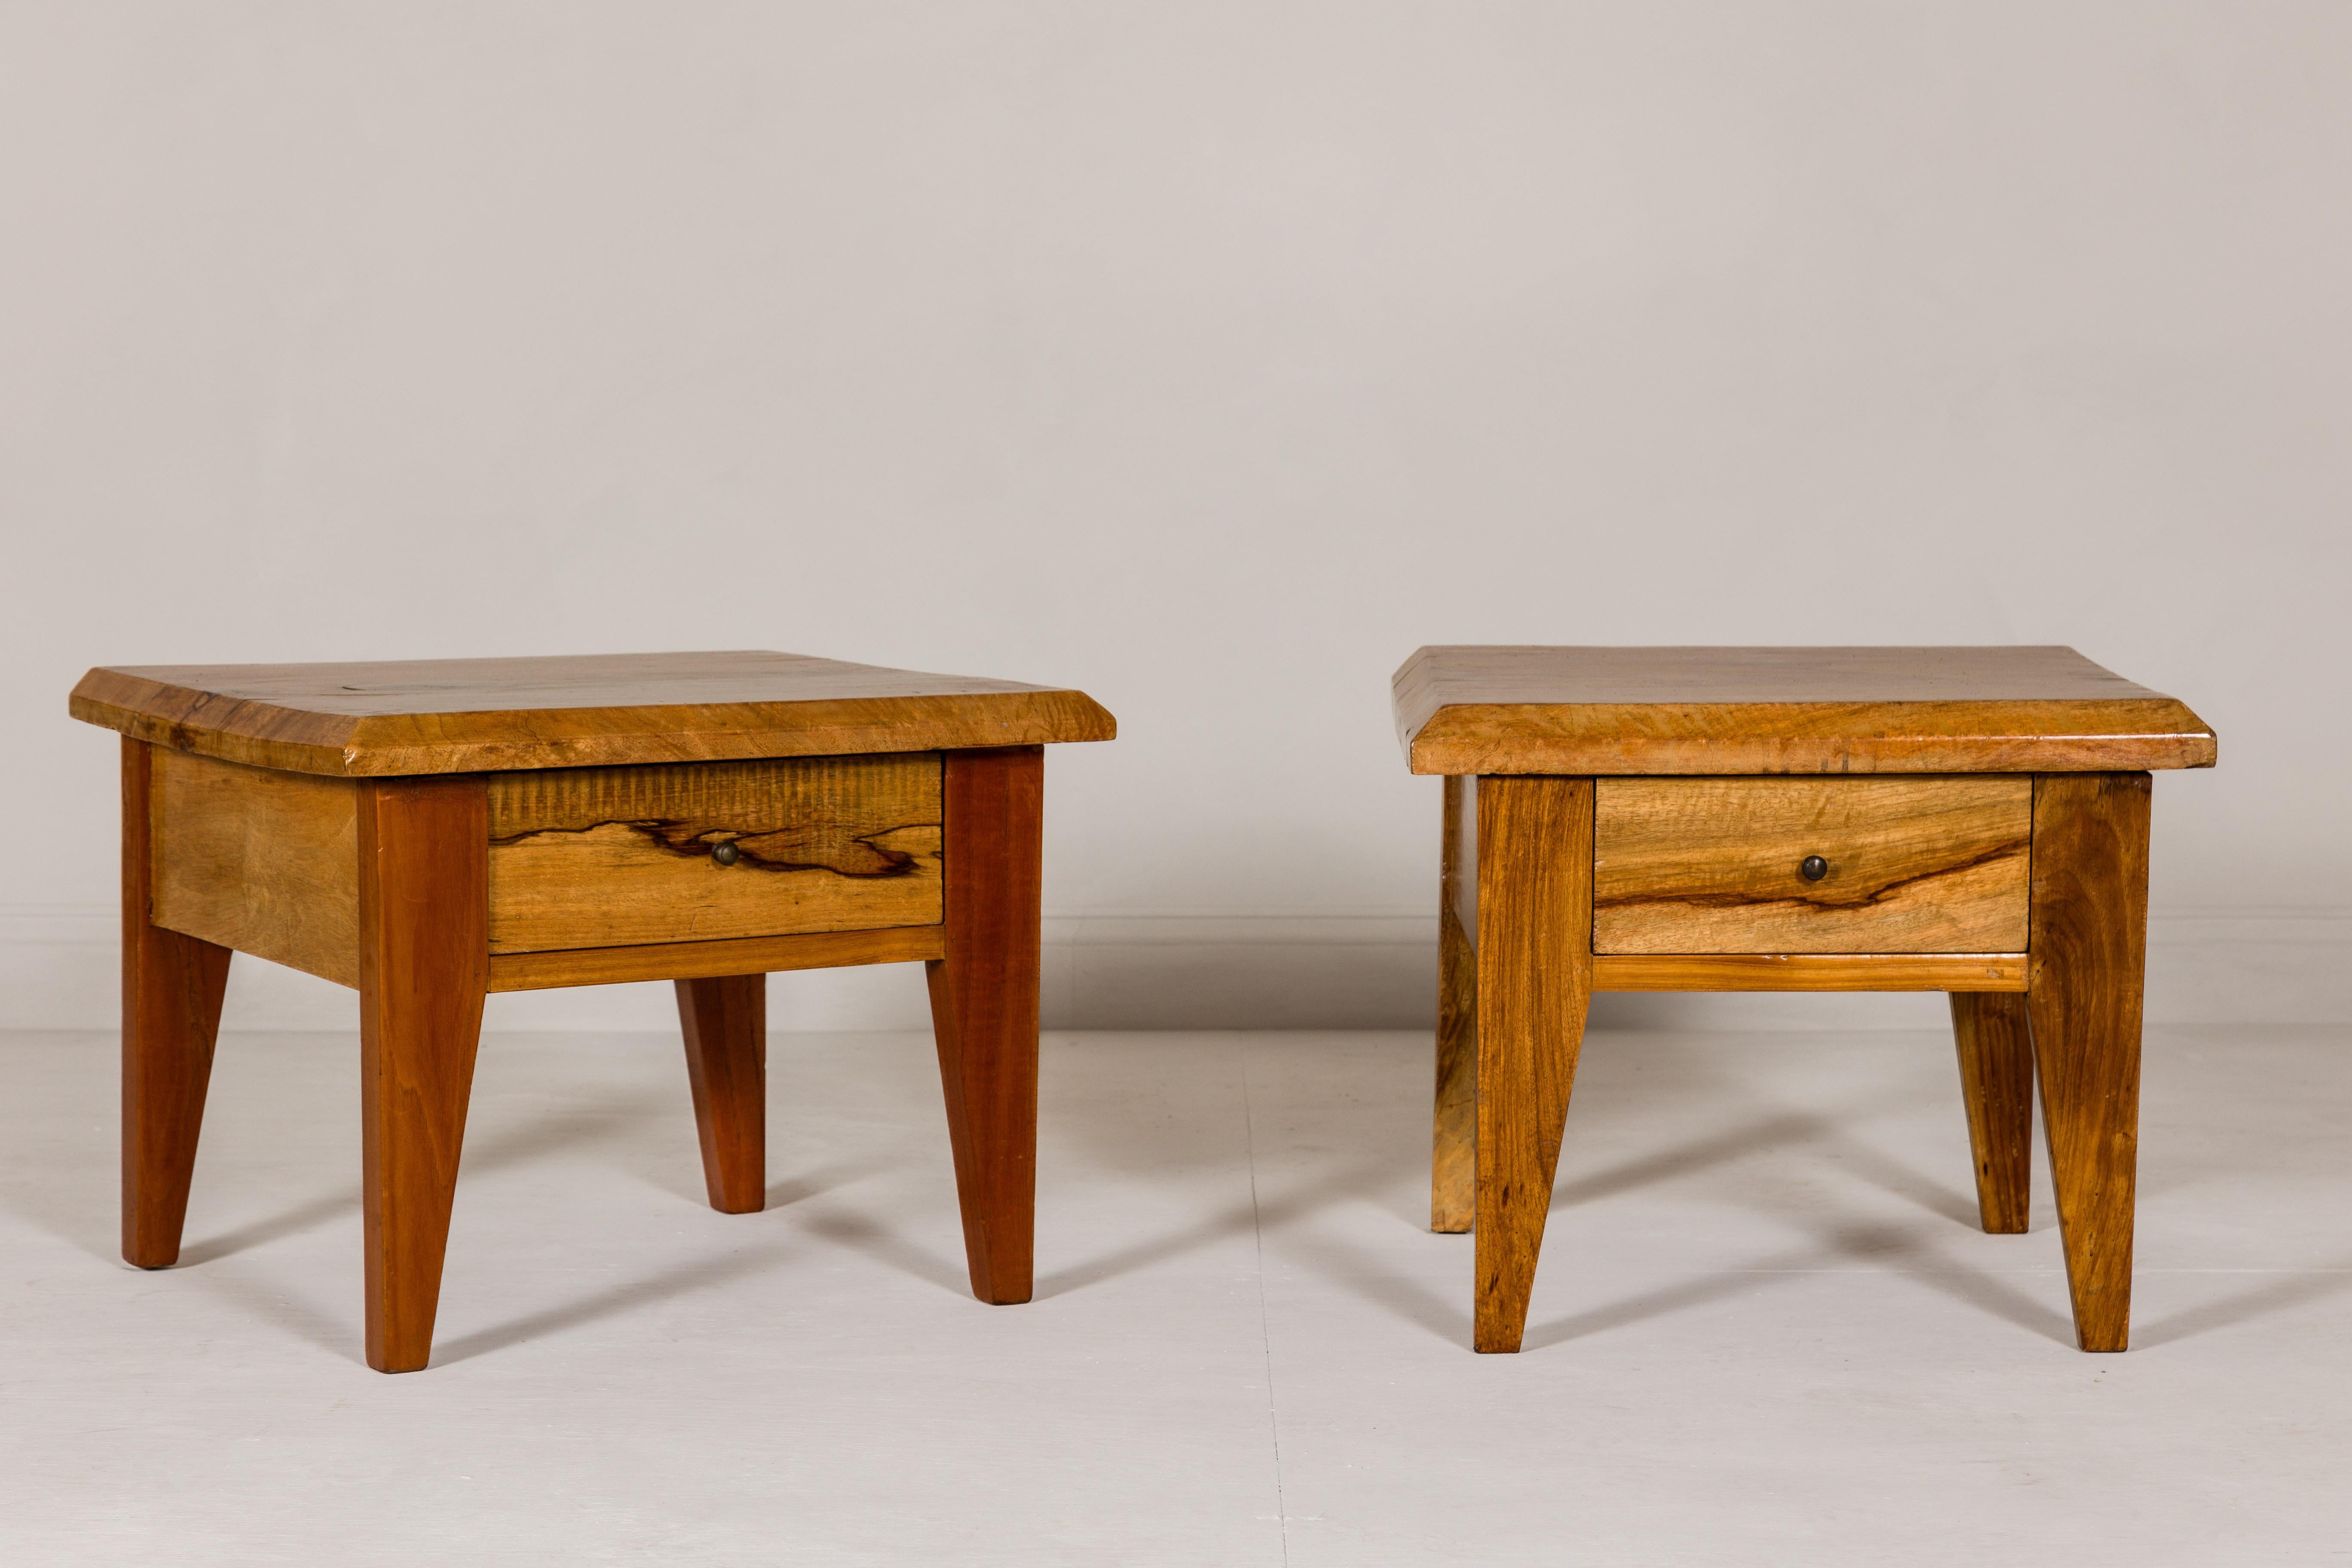 A near pair of Midcentury mango wood low side tables with single drawers and tapering legs. Embodying the timeless appeal of Midcentury design, this near pair of low side tables combines the rich texture of mango wood with functional elegance. The